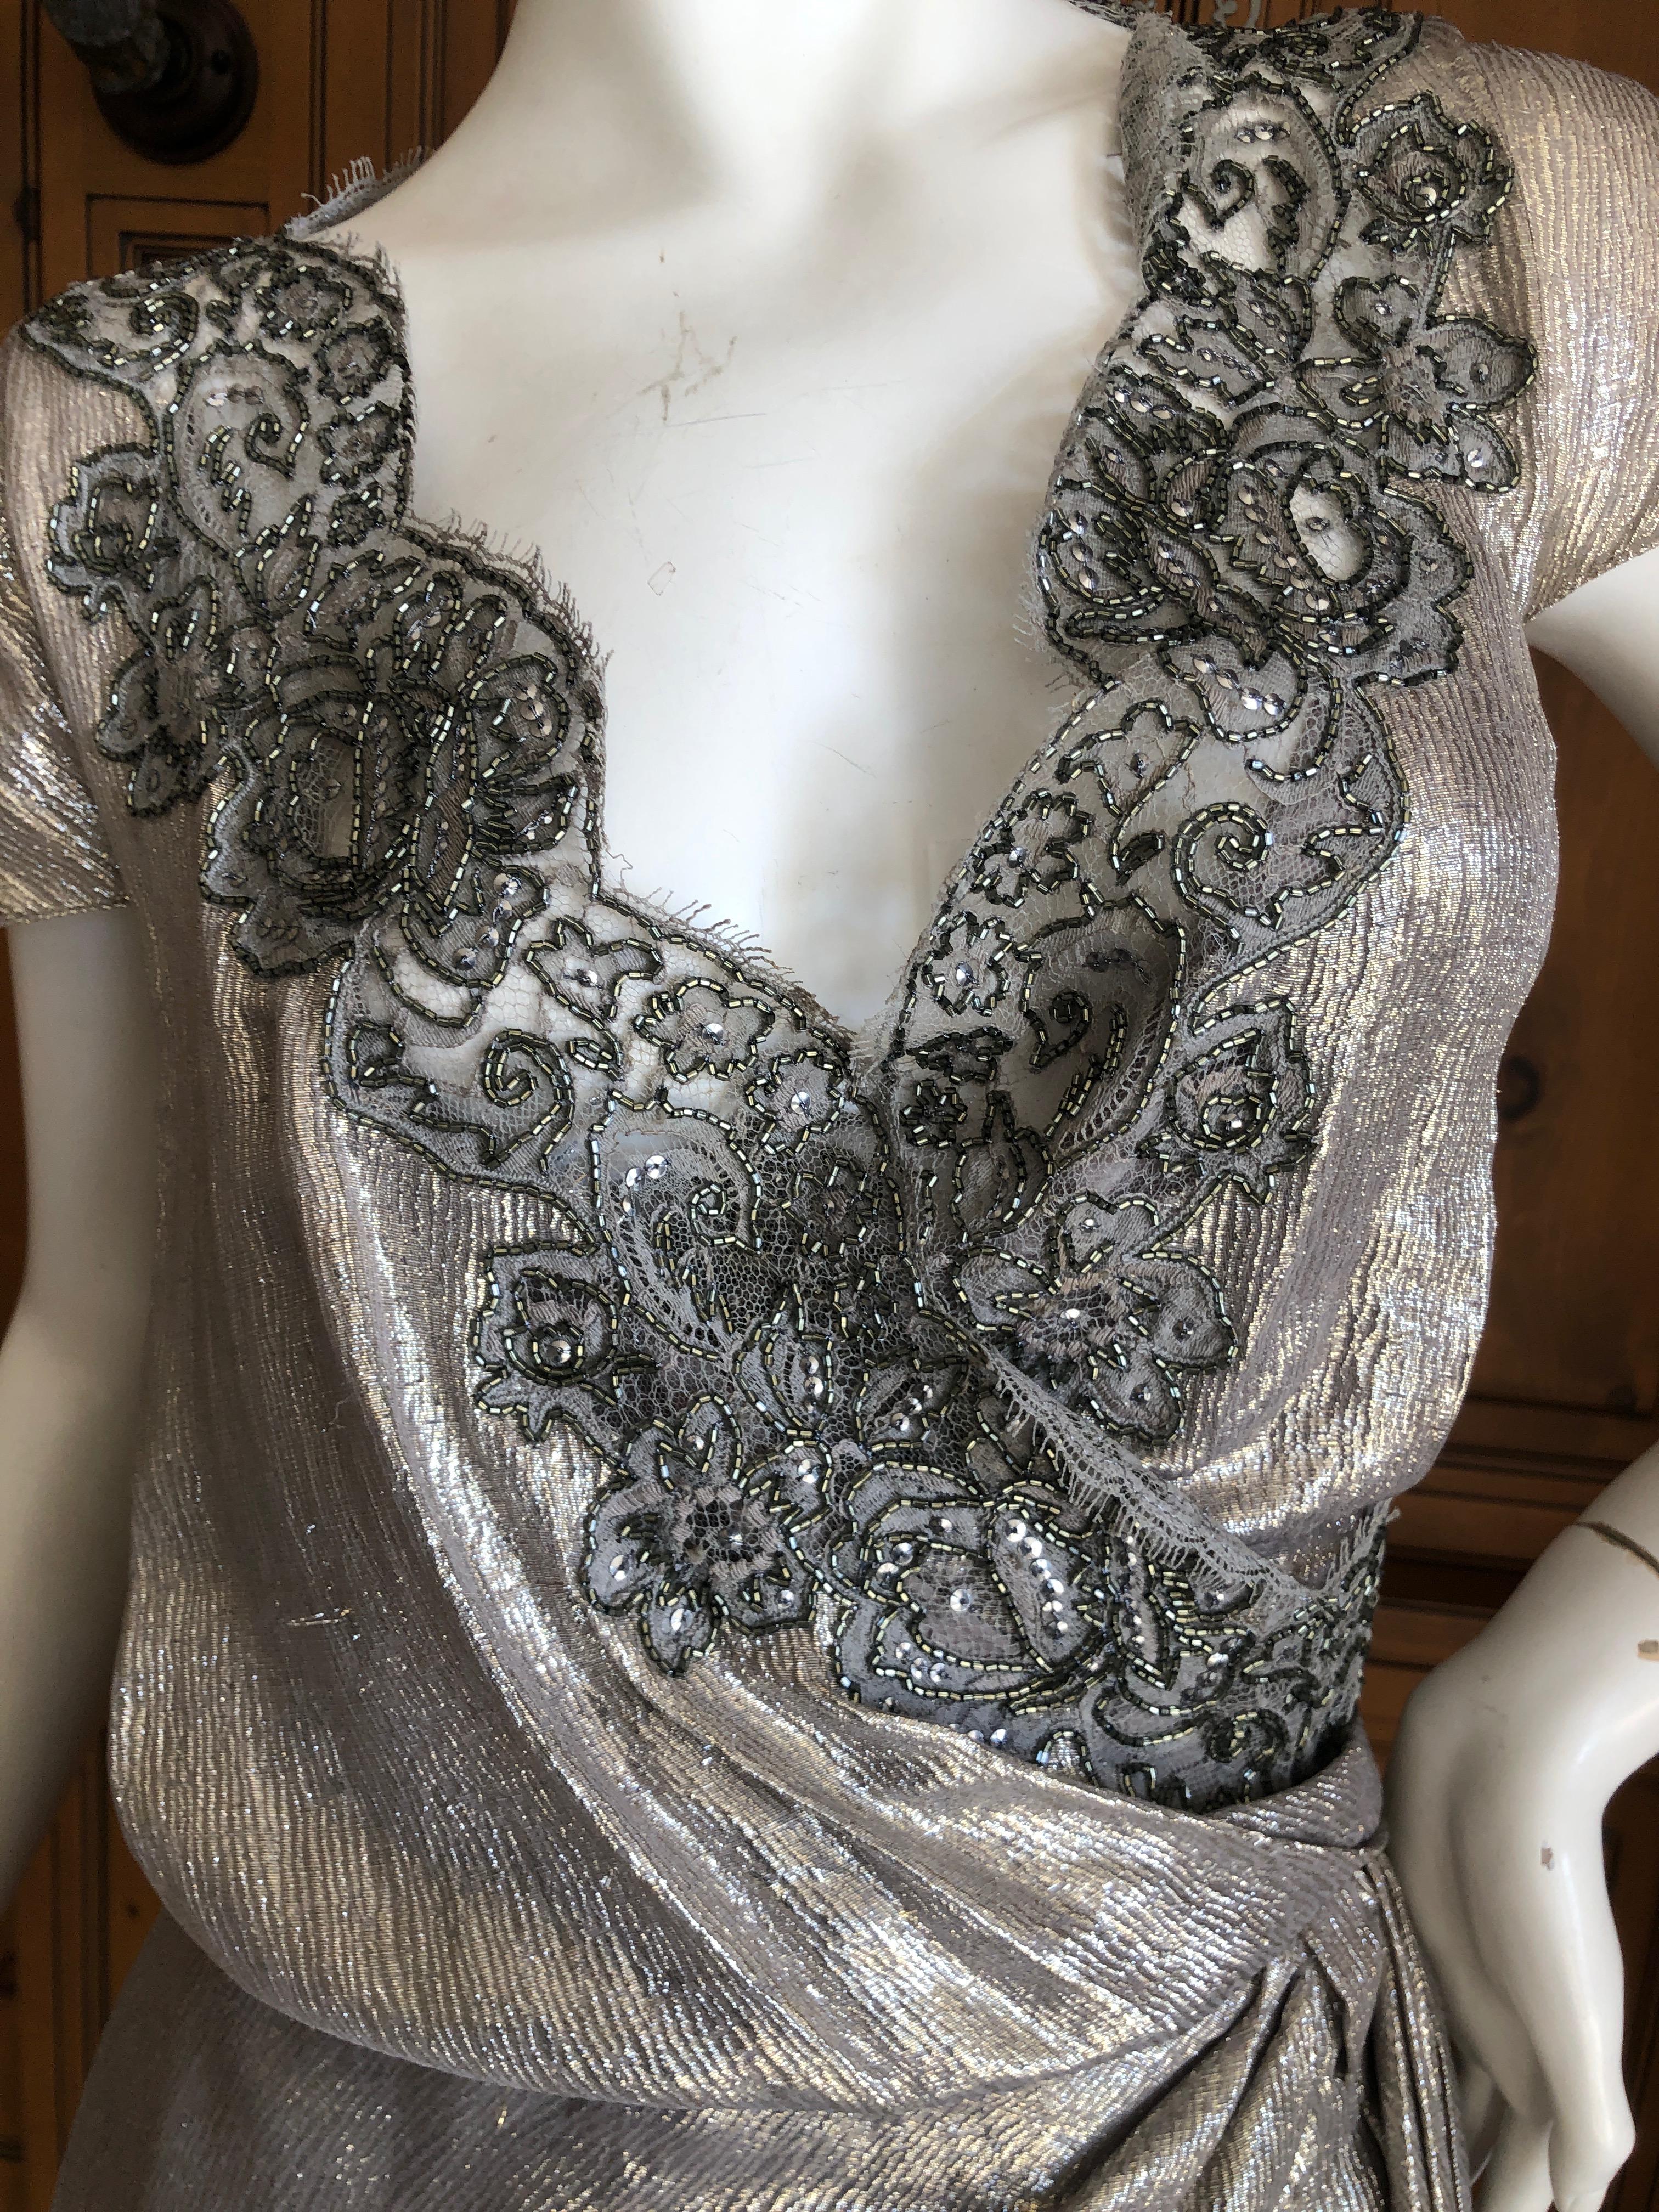  Christian Dior by Gianfranco Ferre Bead Embellished Metallic Wrap Dress  In Excellent Condition For Sale In Cloverdale, CA